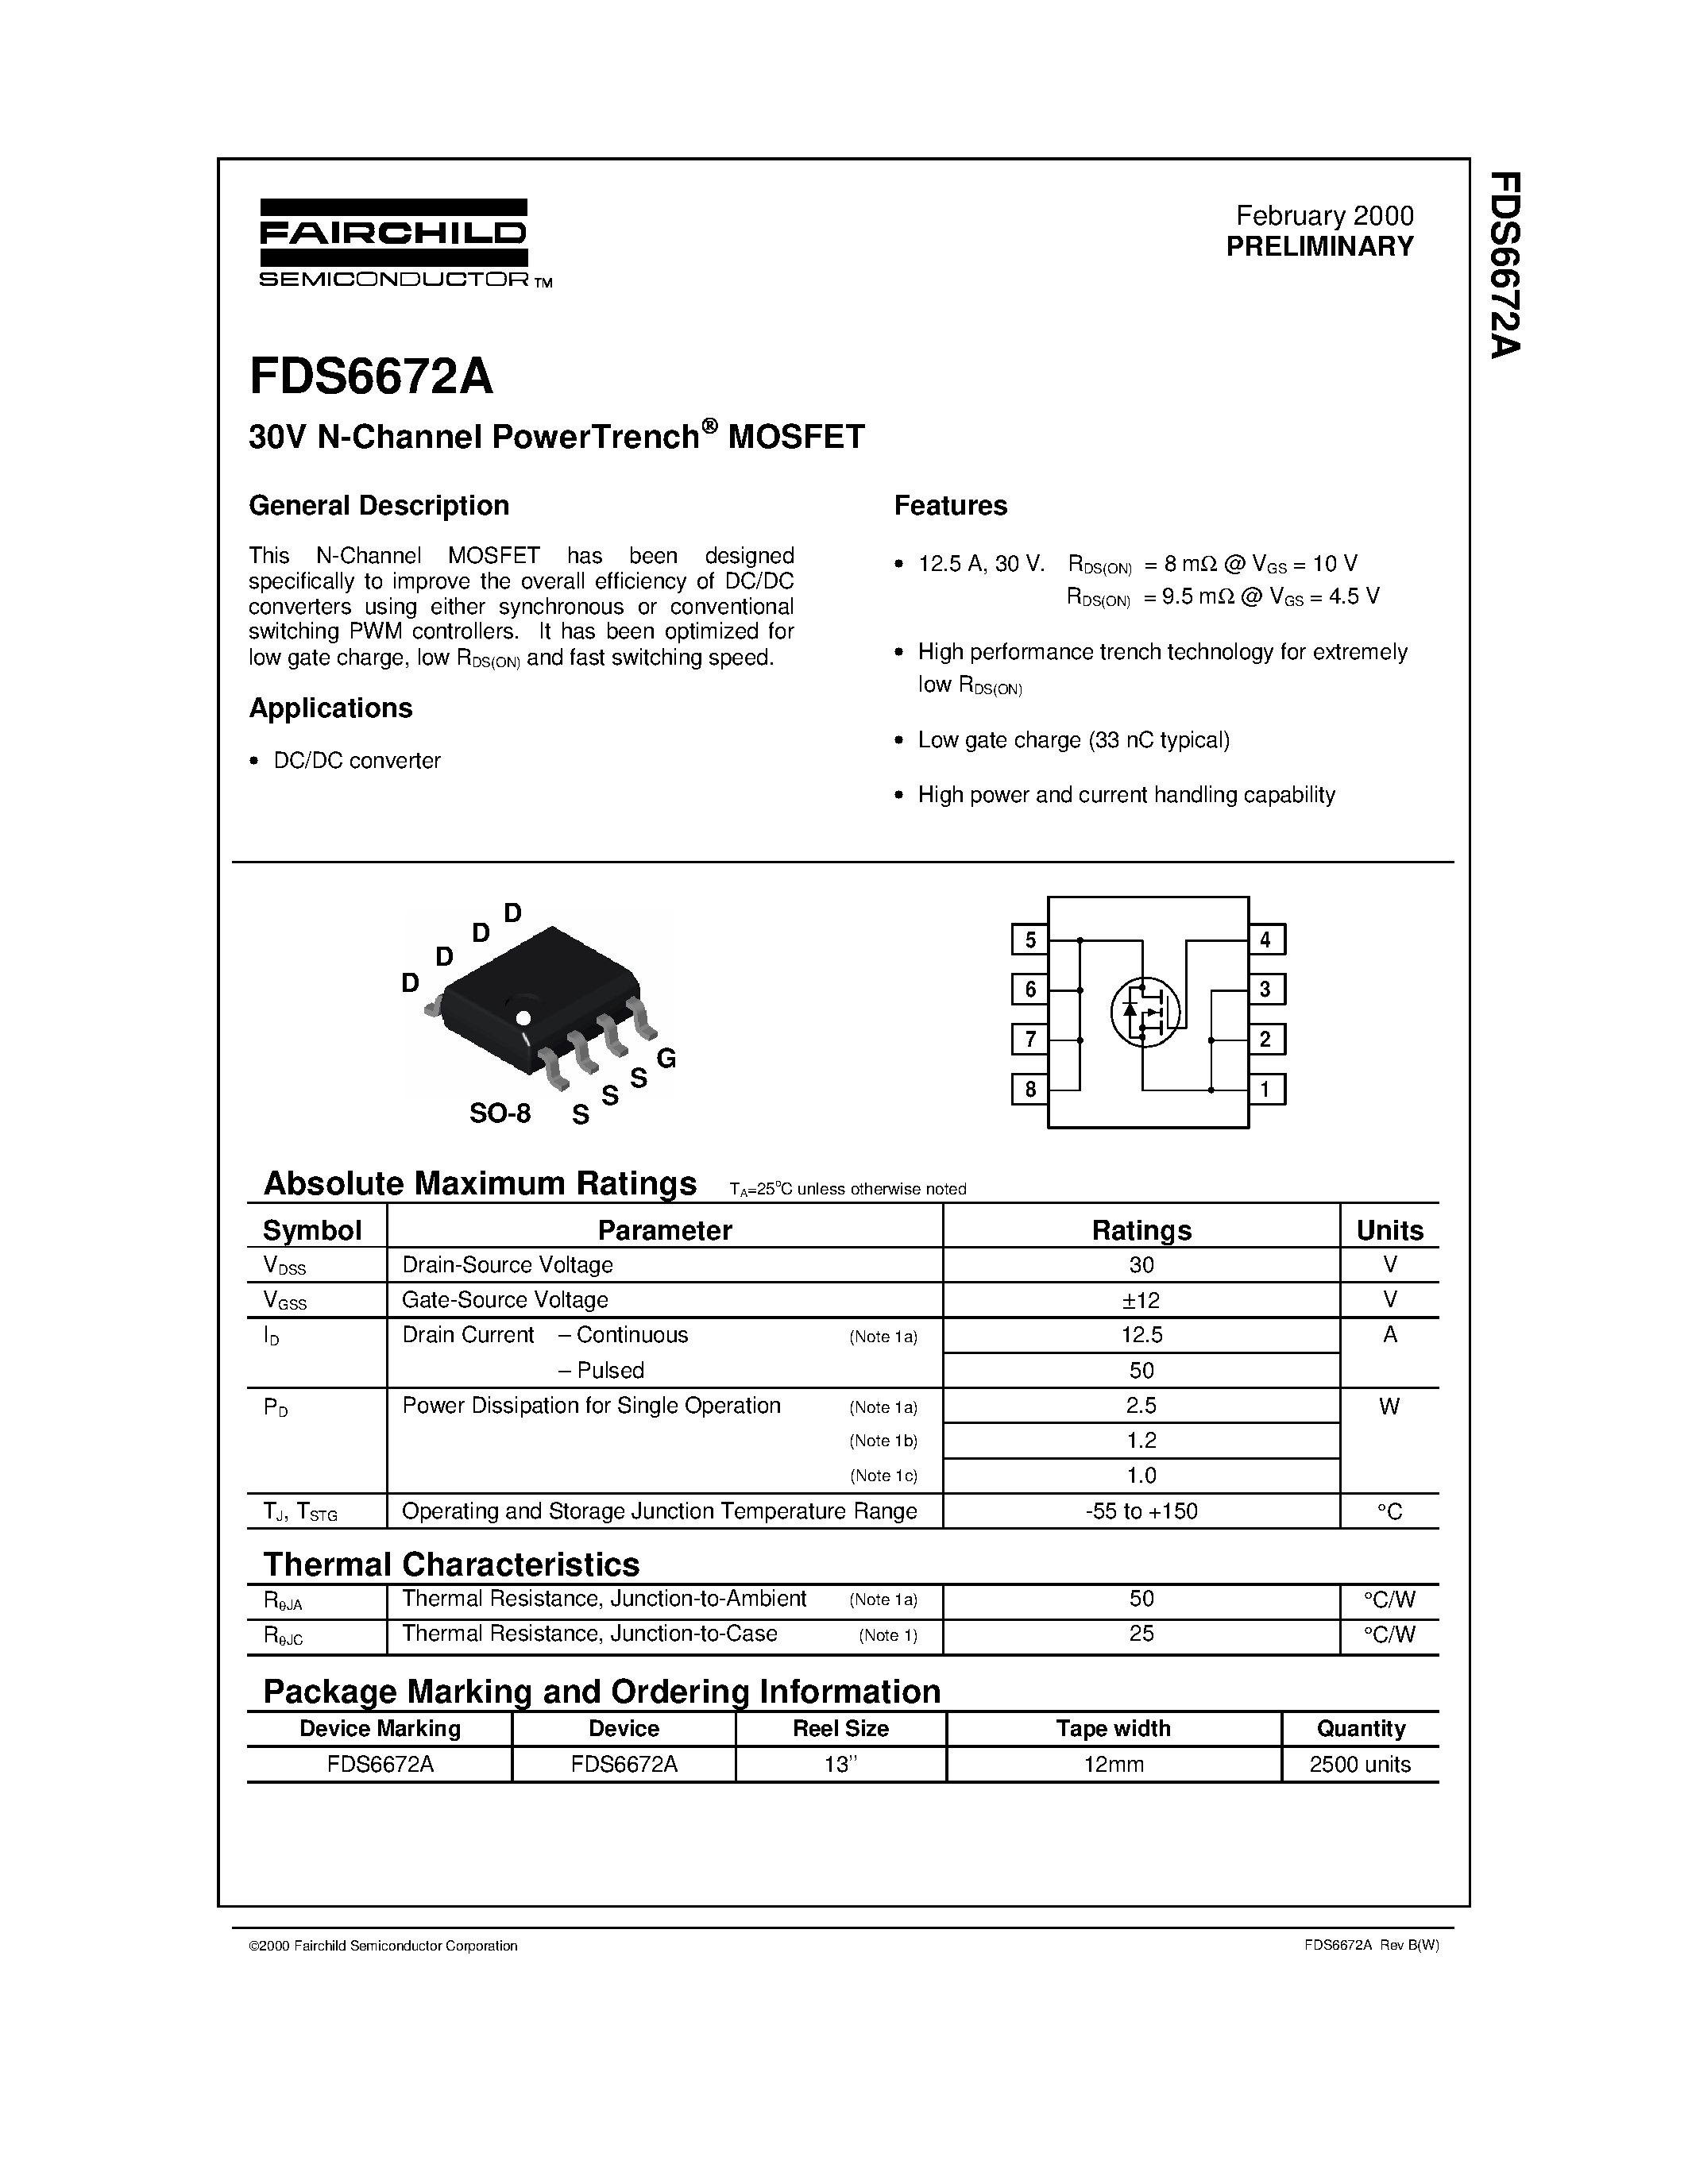 Datasheet FDS6672 - 30V N-Channel PowerTrench MOSFET page 1